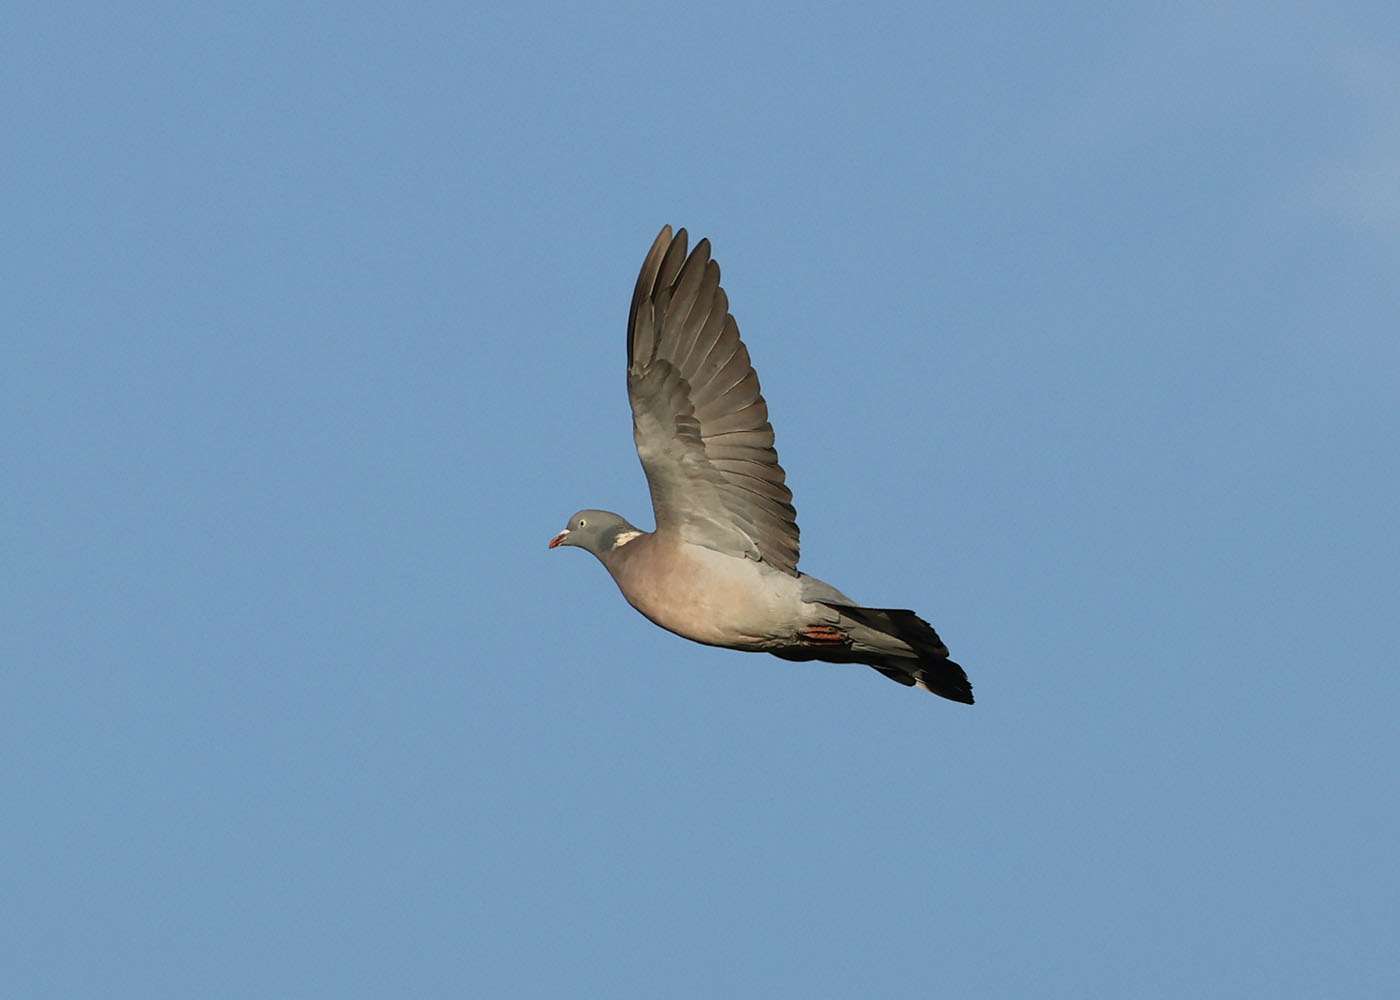 Woodpigeon by Steve Hopper at South Brent